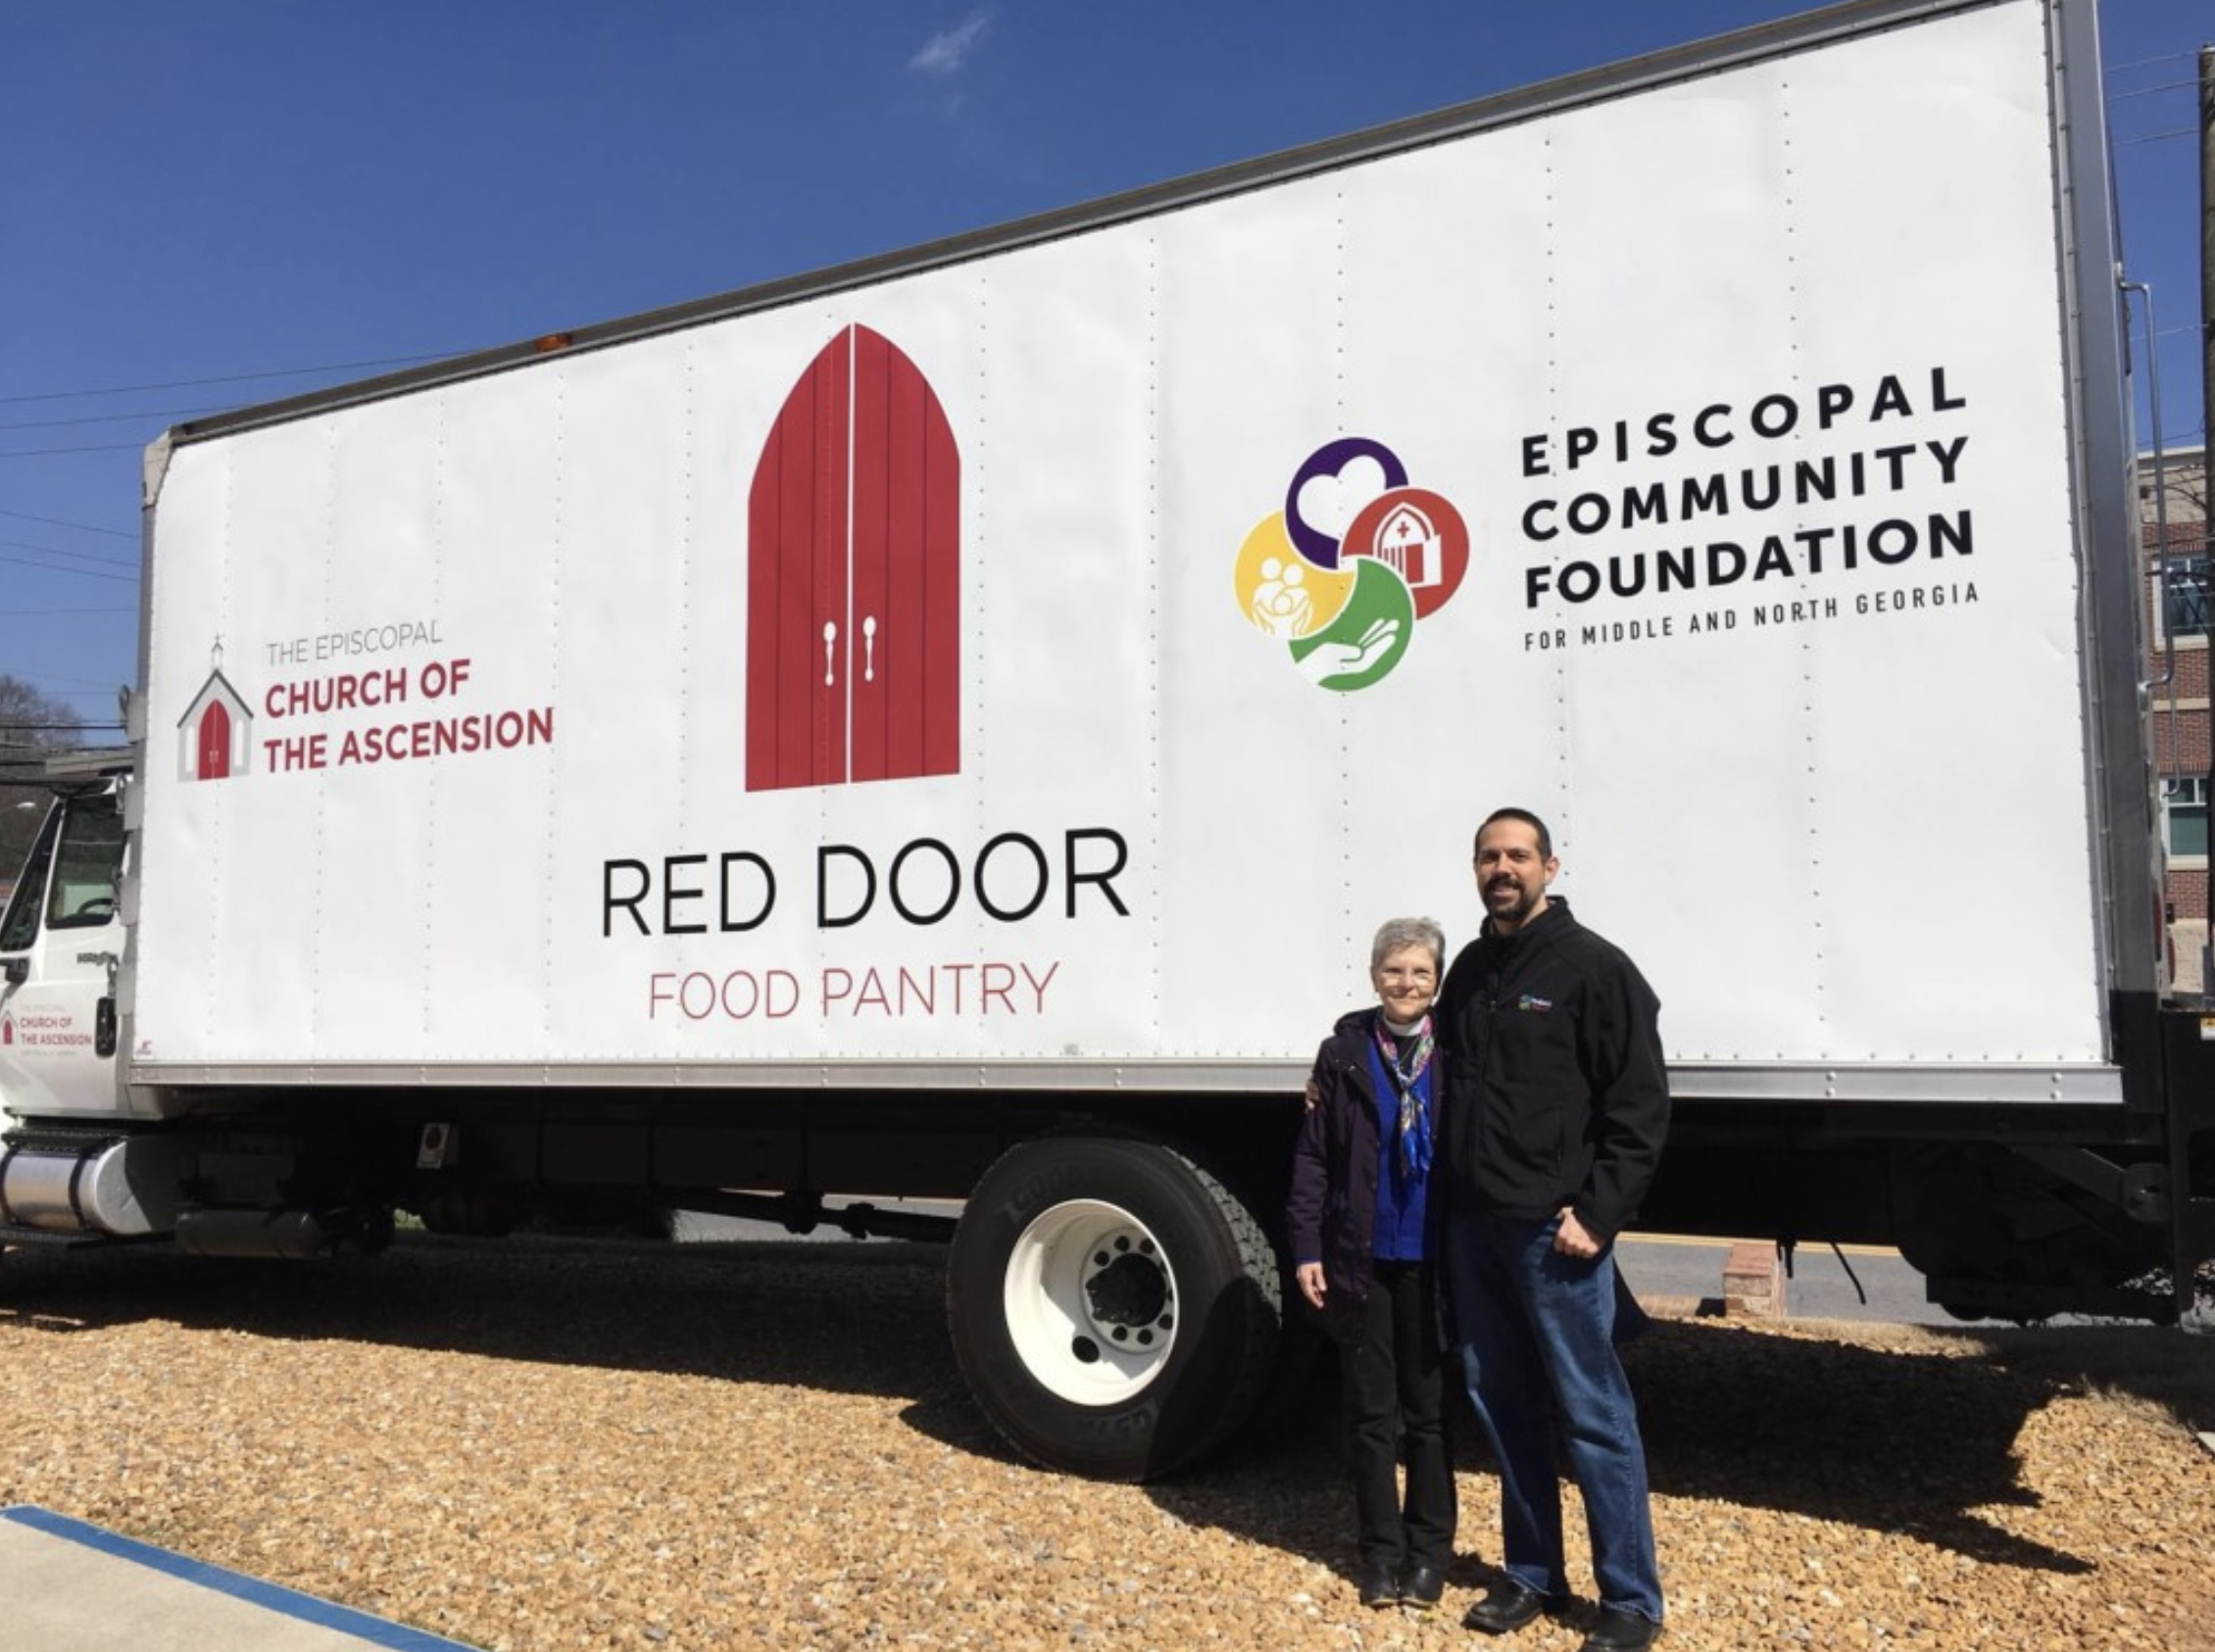 Red Door Food Pantry in Cartersville Georgia, hosted by The Episcopal Church of the Ascension